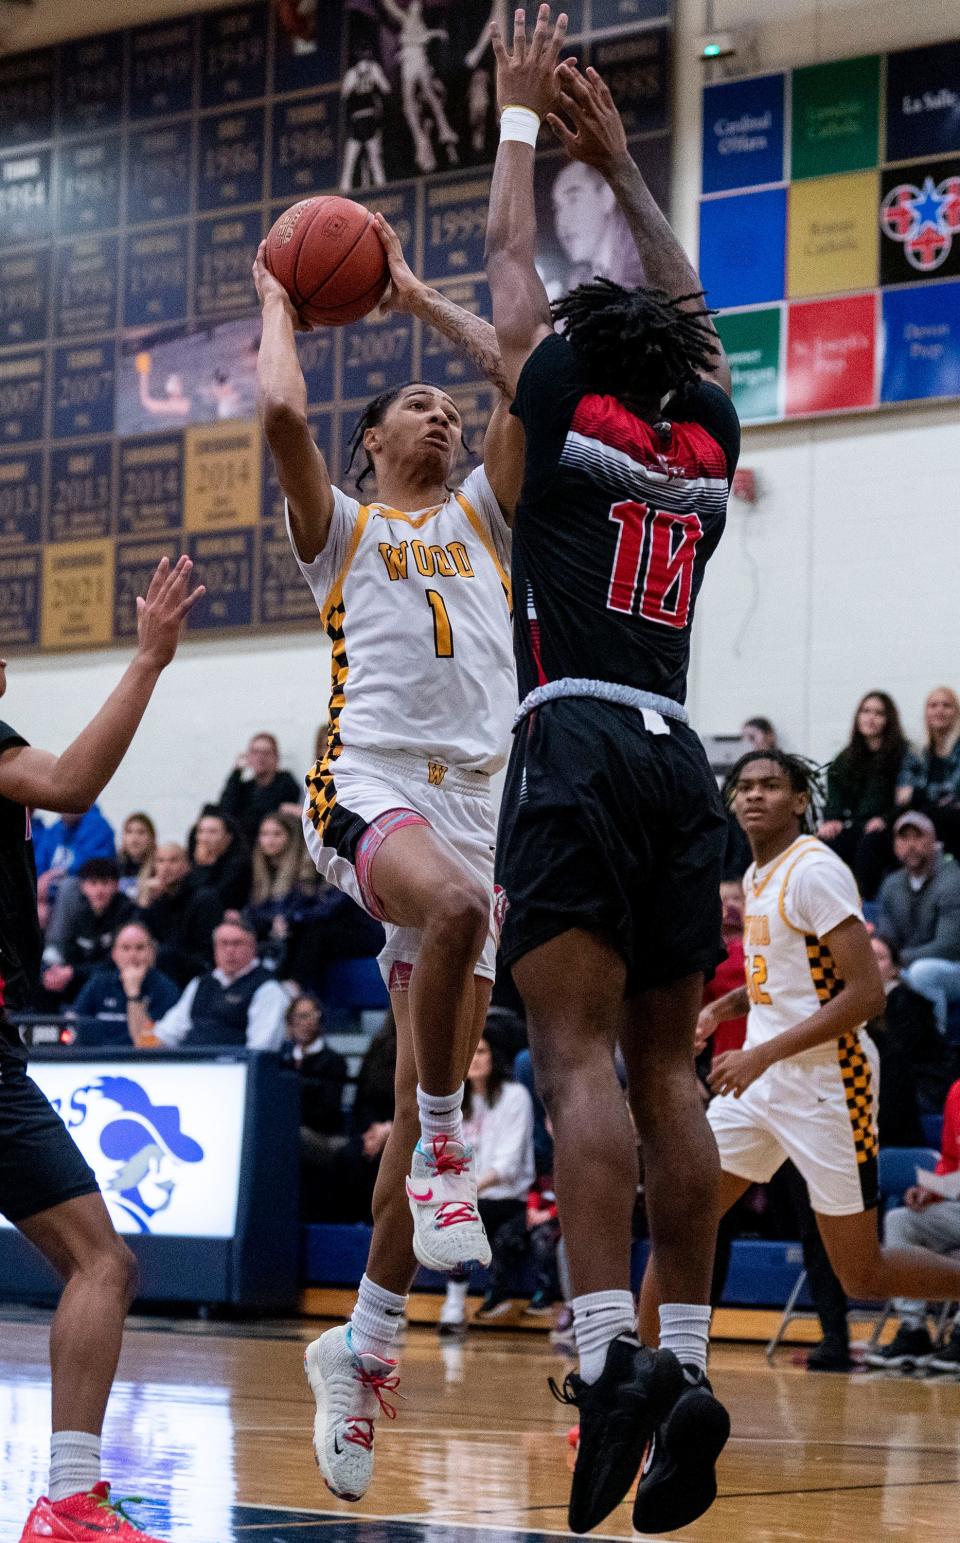 Archbishop Wood's Jalil Bethea (1) gets to the basket against Northeast's Sharif Wallace during Tuesday's District 12 third-place playoff game at La Salle High.